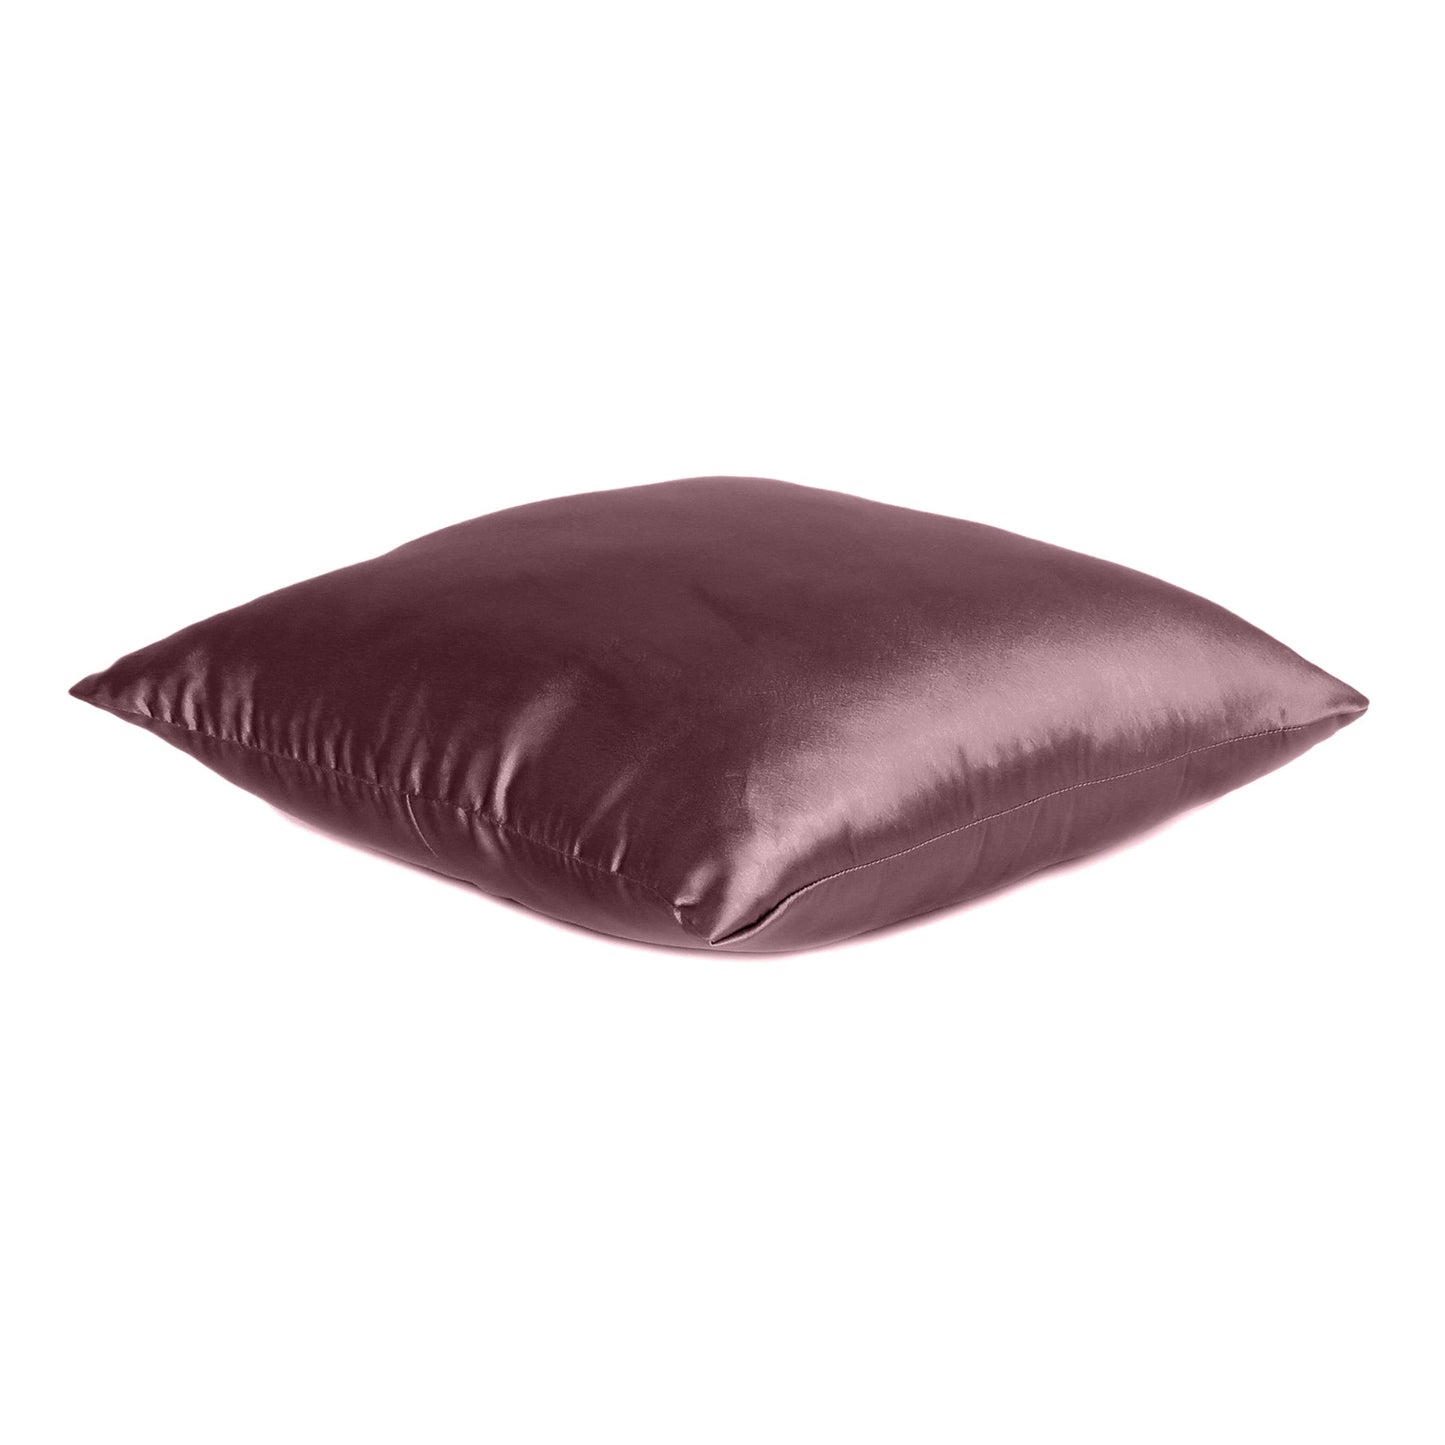 Grape Wine Satin Silky Cushion Covers in Set of 2